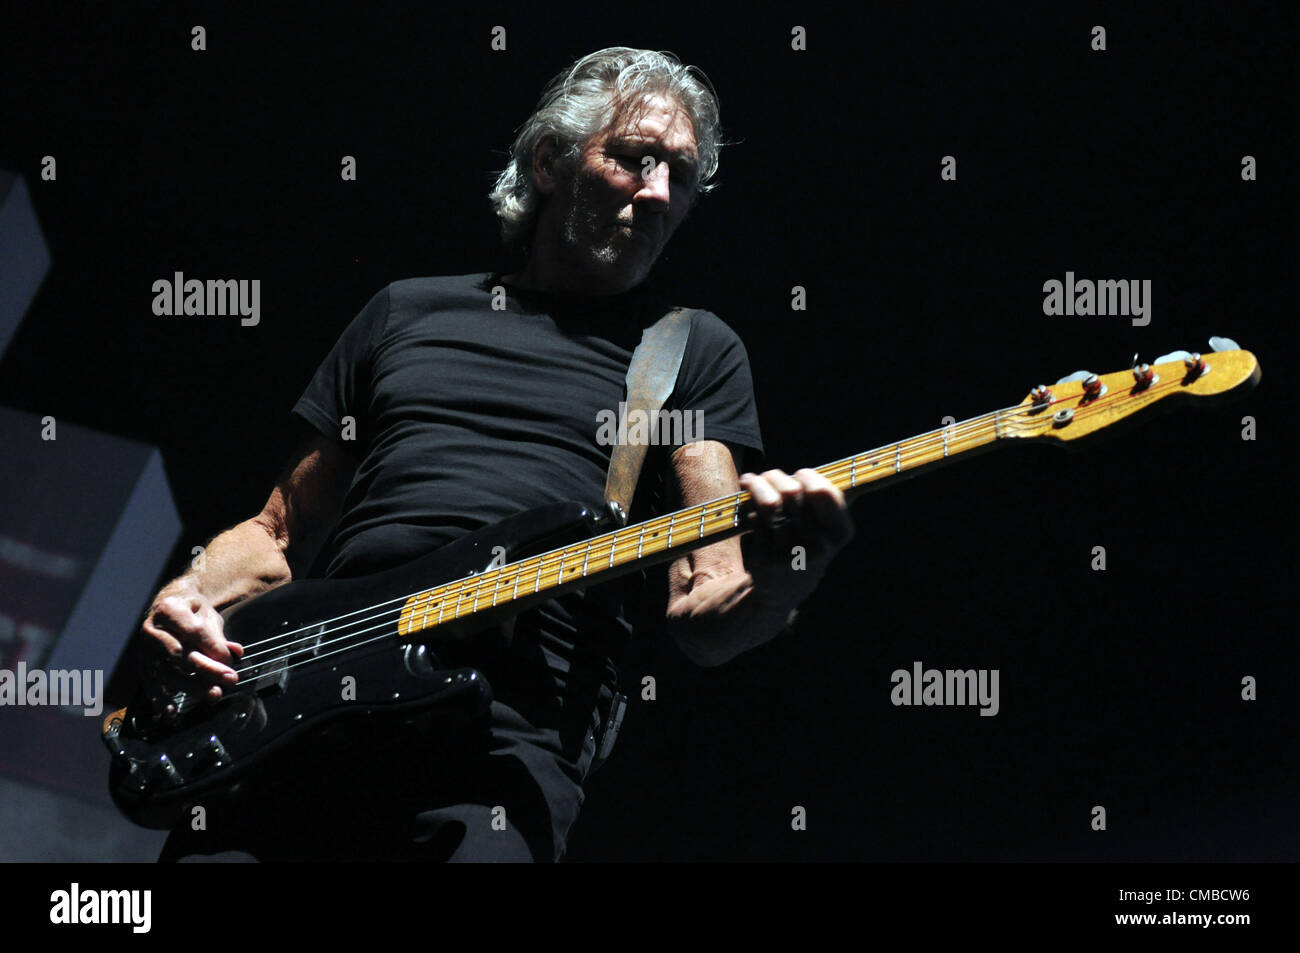 July 09, 2012 - Raleigh, North Carolina, U.S. - Singer ROGER WATERS performing 'The Wall Live' at the PNC Arena located in Raleigh. (Credit Image: © Tina Fultz/ZUMAPRESS.com) Stock Photo